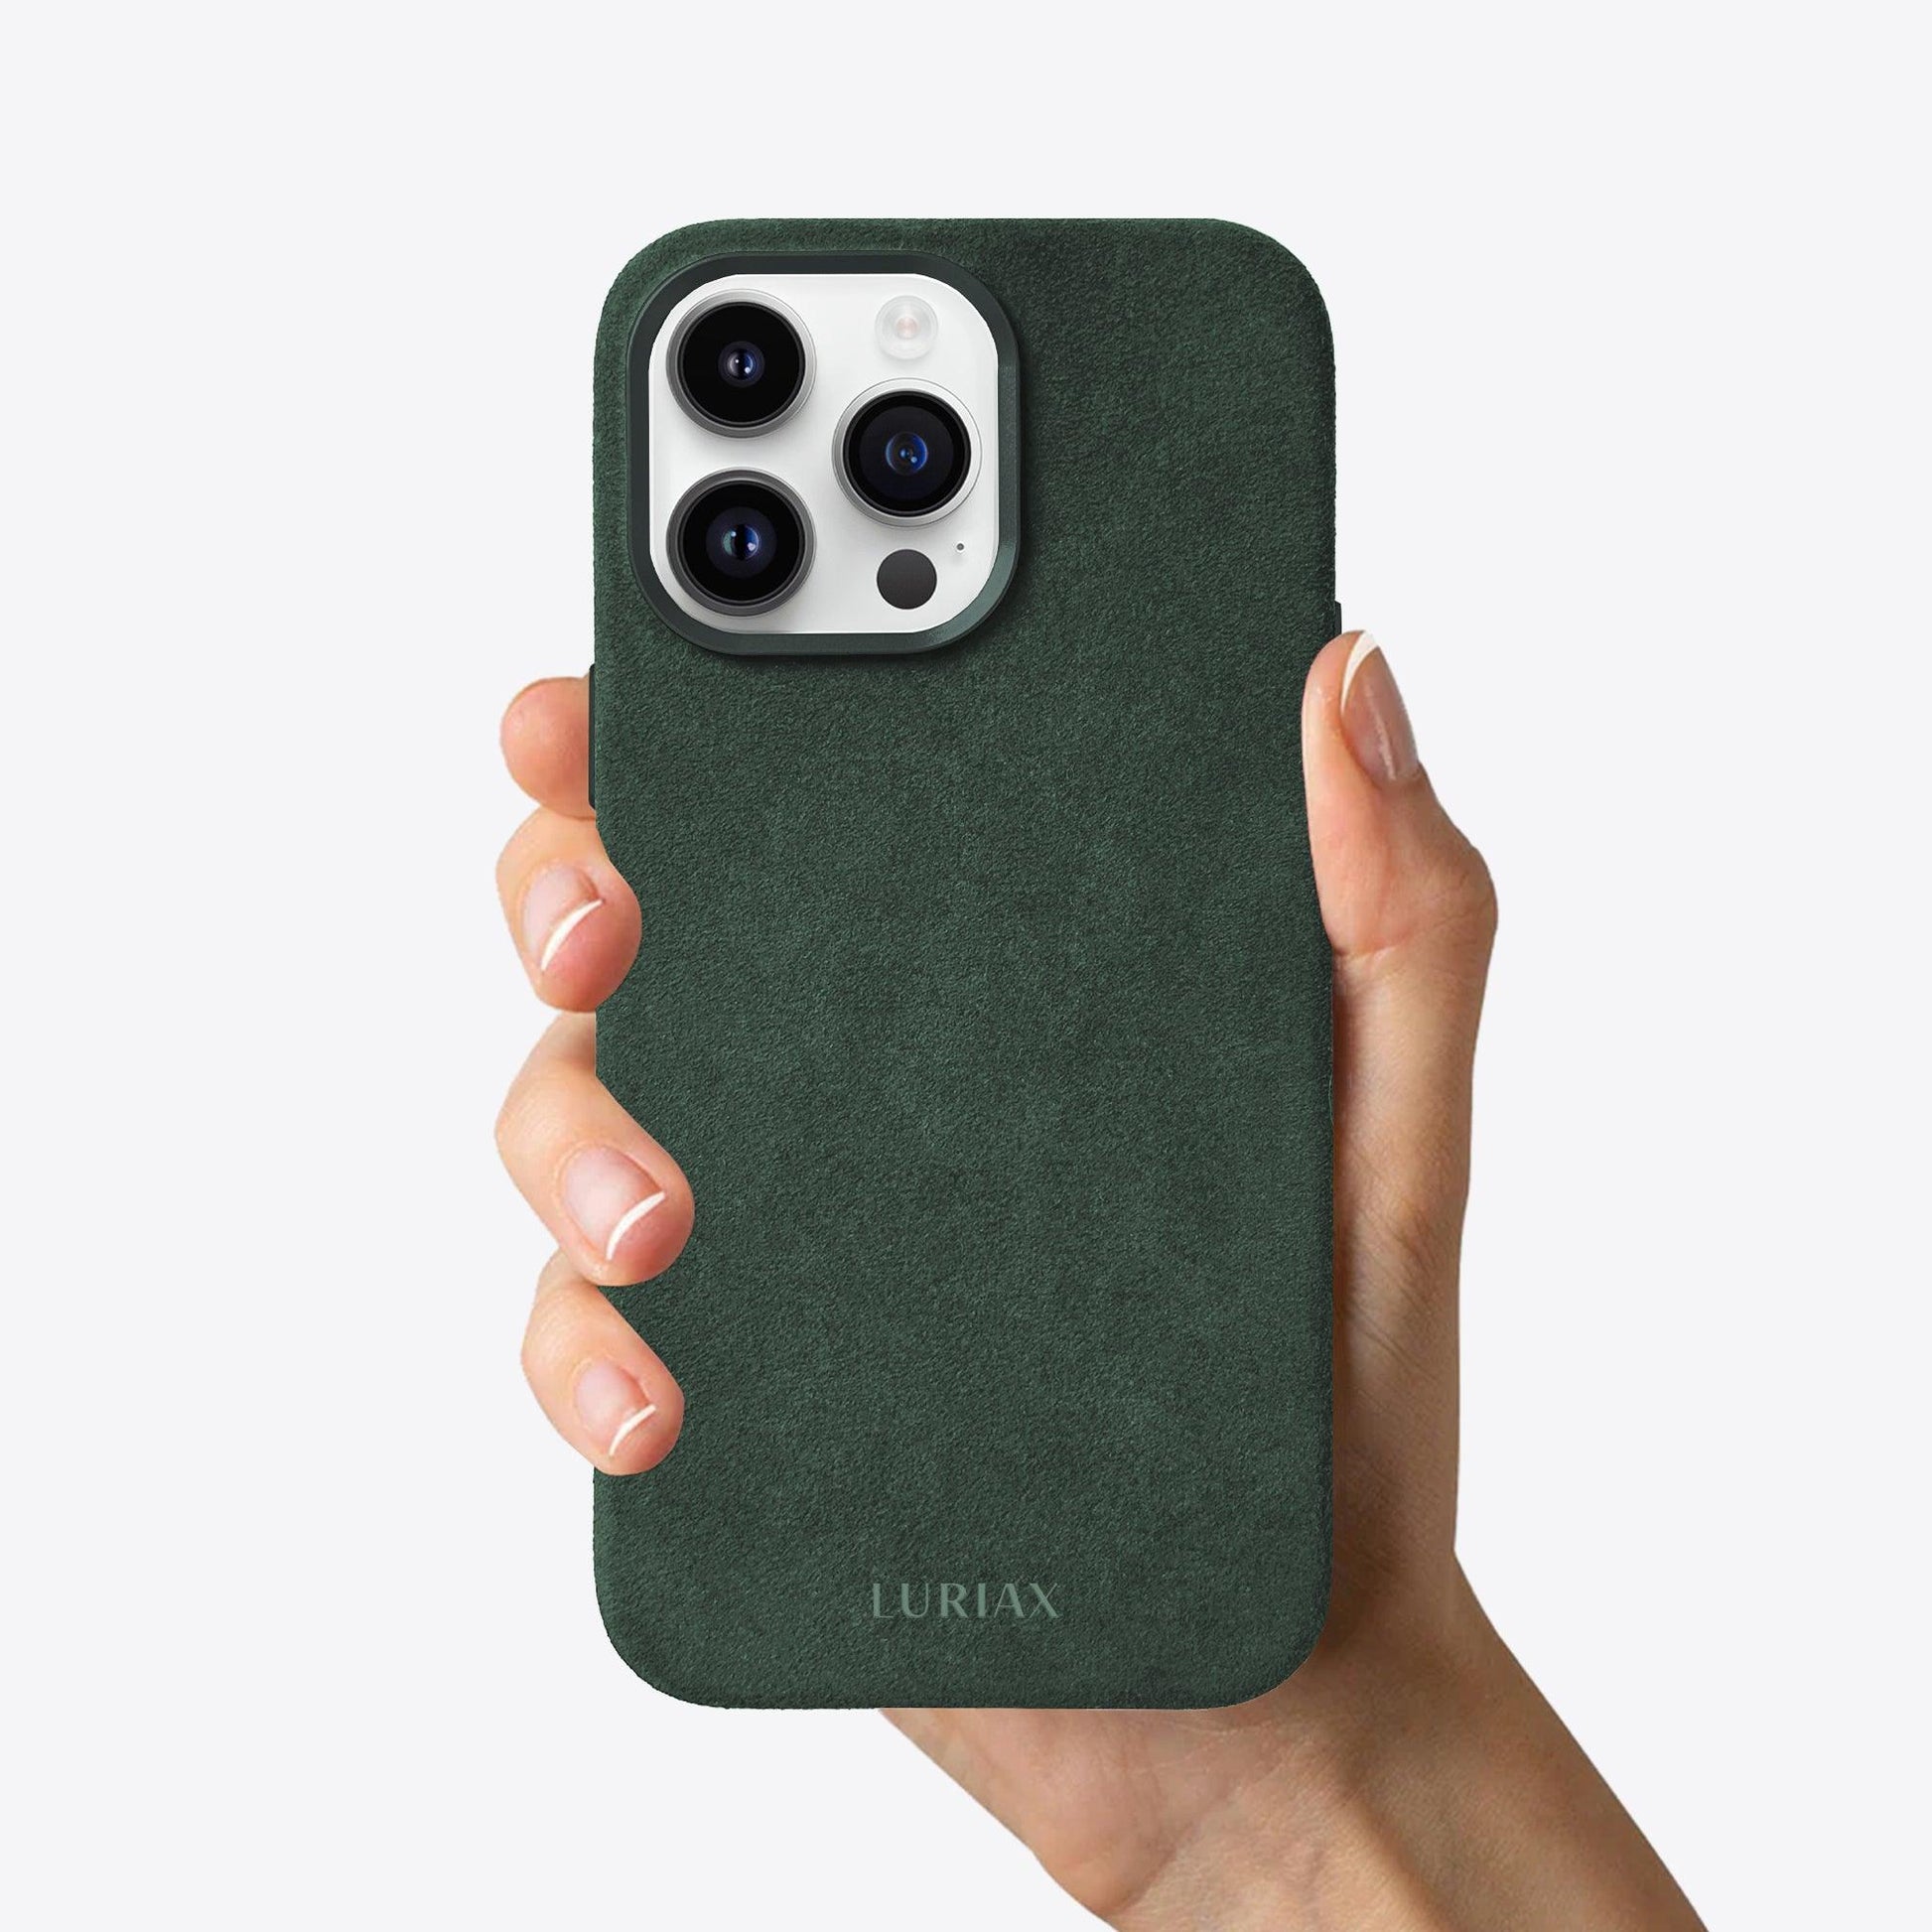 Alcantara Suede Leather iPhone Case and Accessories Collection - The Classic iPhone Case - Midnight Green - Luriax